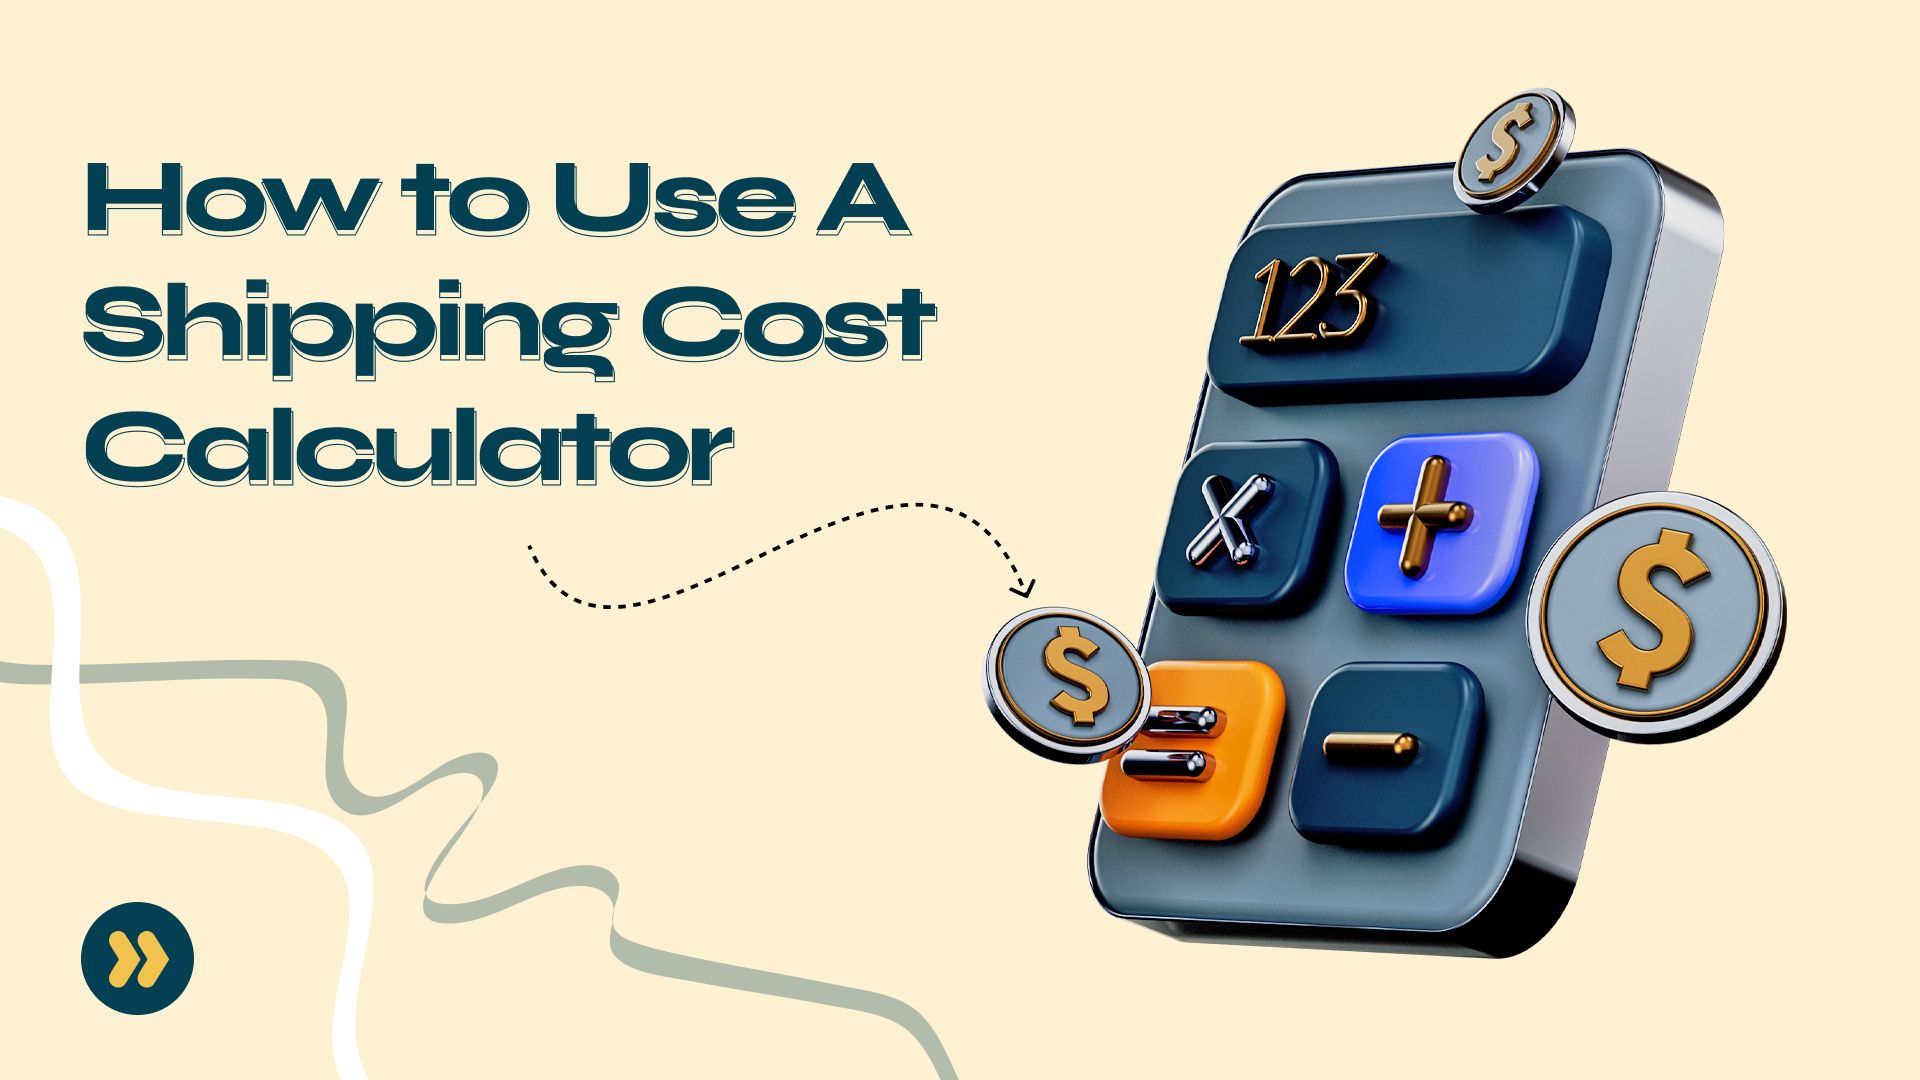 Learn How to Use A Shipping Cost Calculator in 5 Minutes